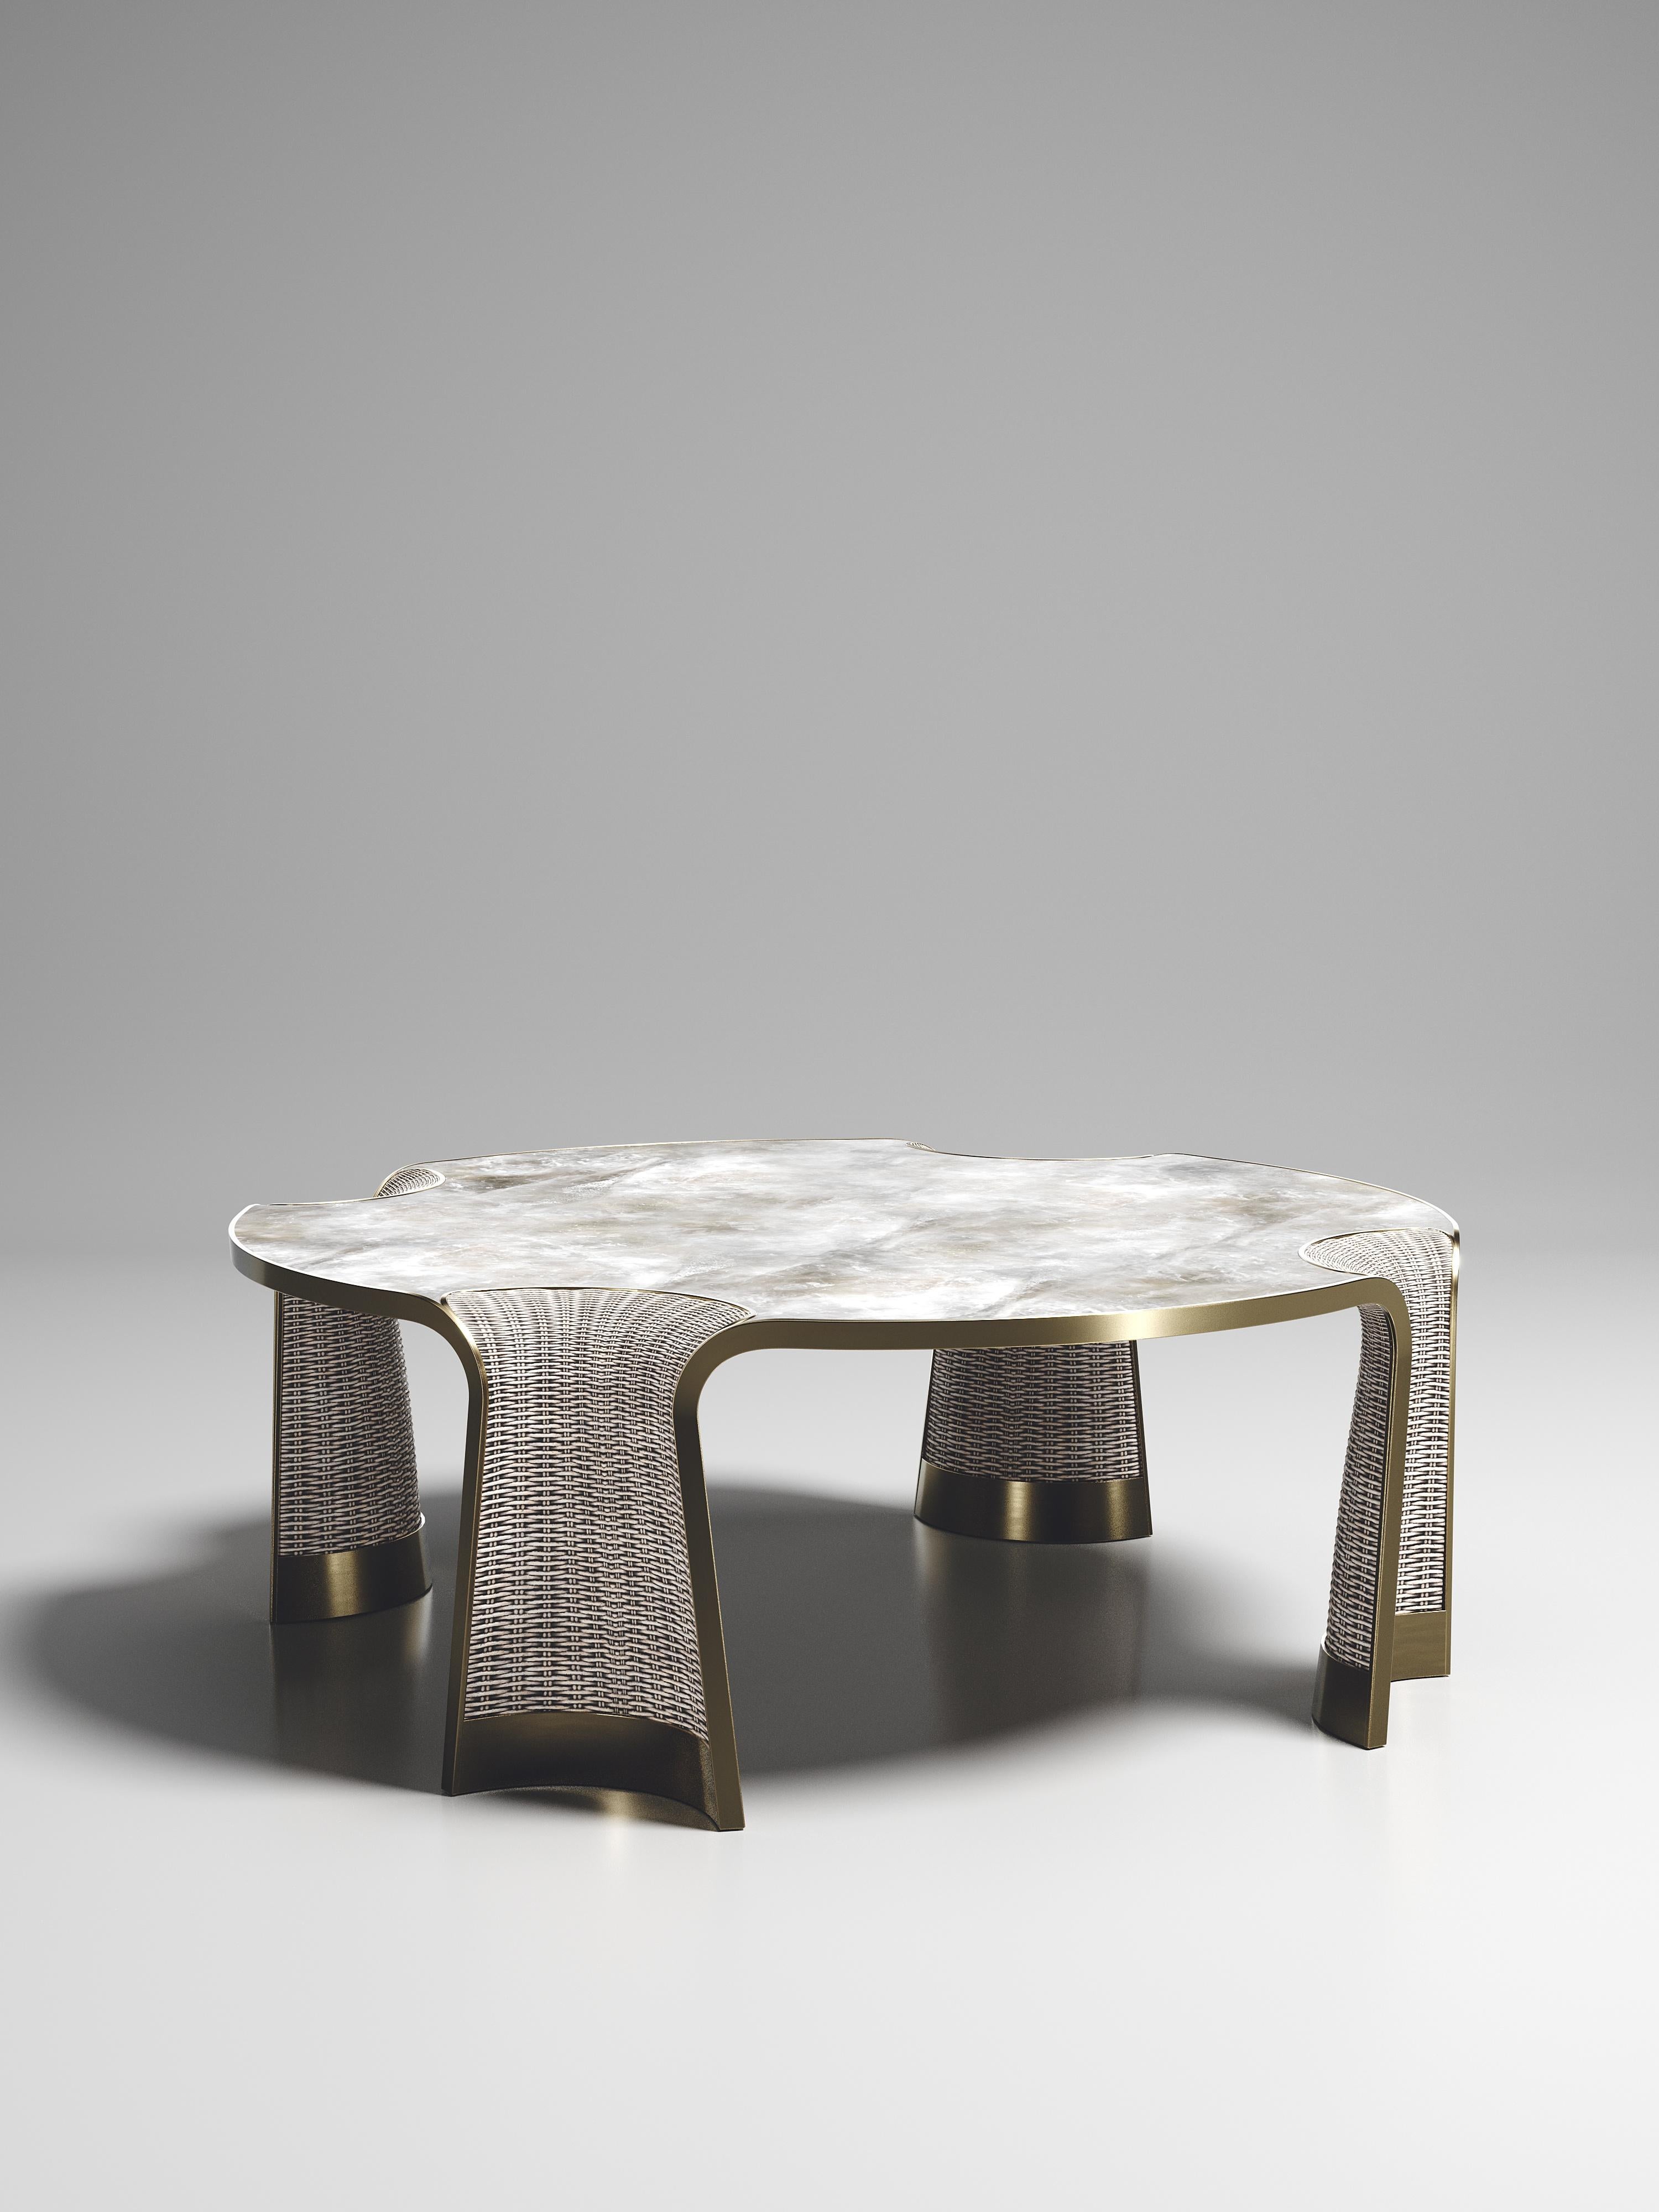 The Nymphea round coffee by R & Y Augousti is a part of their new Rattan capsule launch. The piece explores the brand's iconic DNA of bringing old world artisanal craft into a contemporary and utterly luxury feel. This table is done in a cream